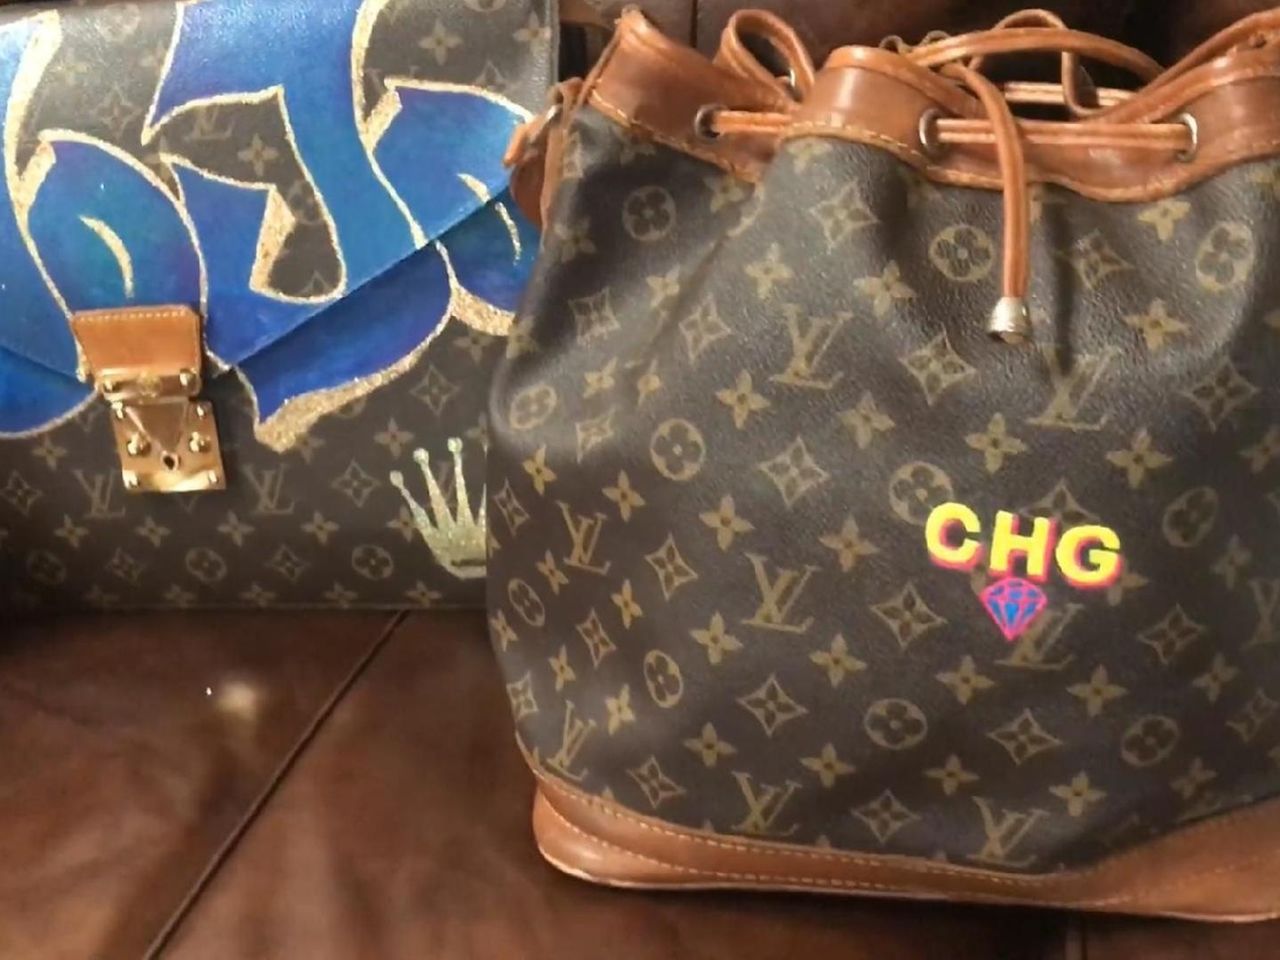 Change Lv leather - Revived Bag Repair and restoration